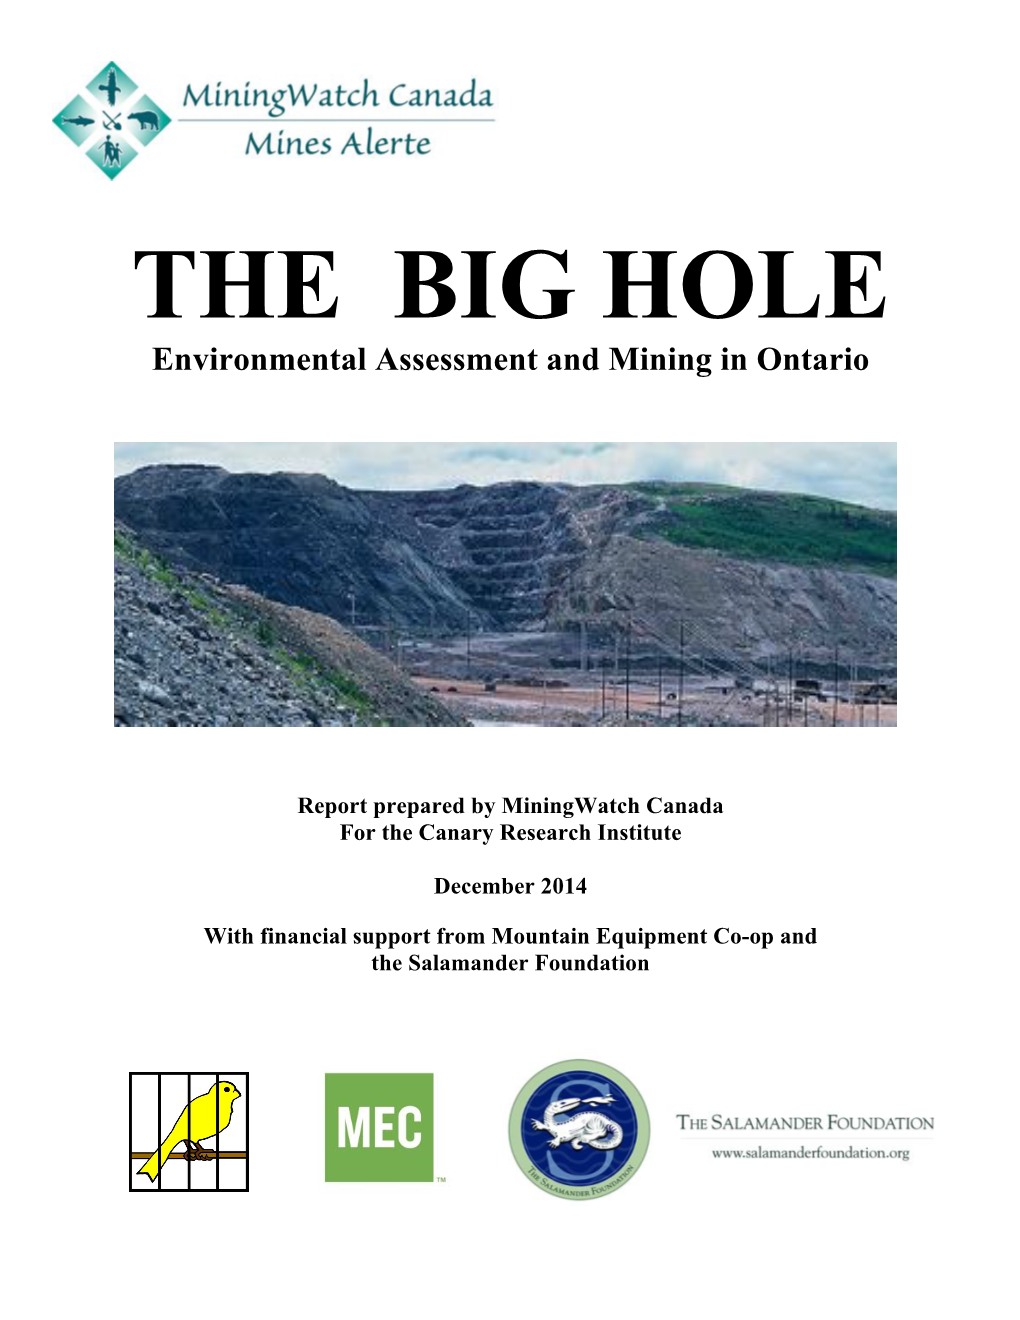 The Big Hole: Environmental Assessment and Mining in Ontario